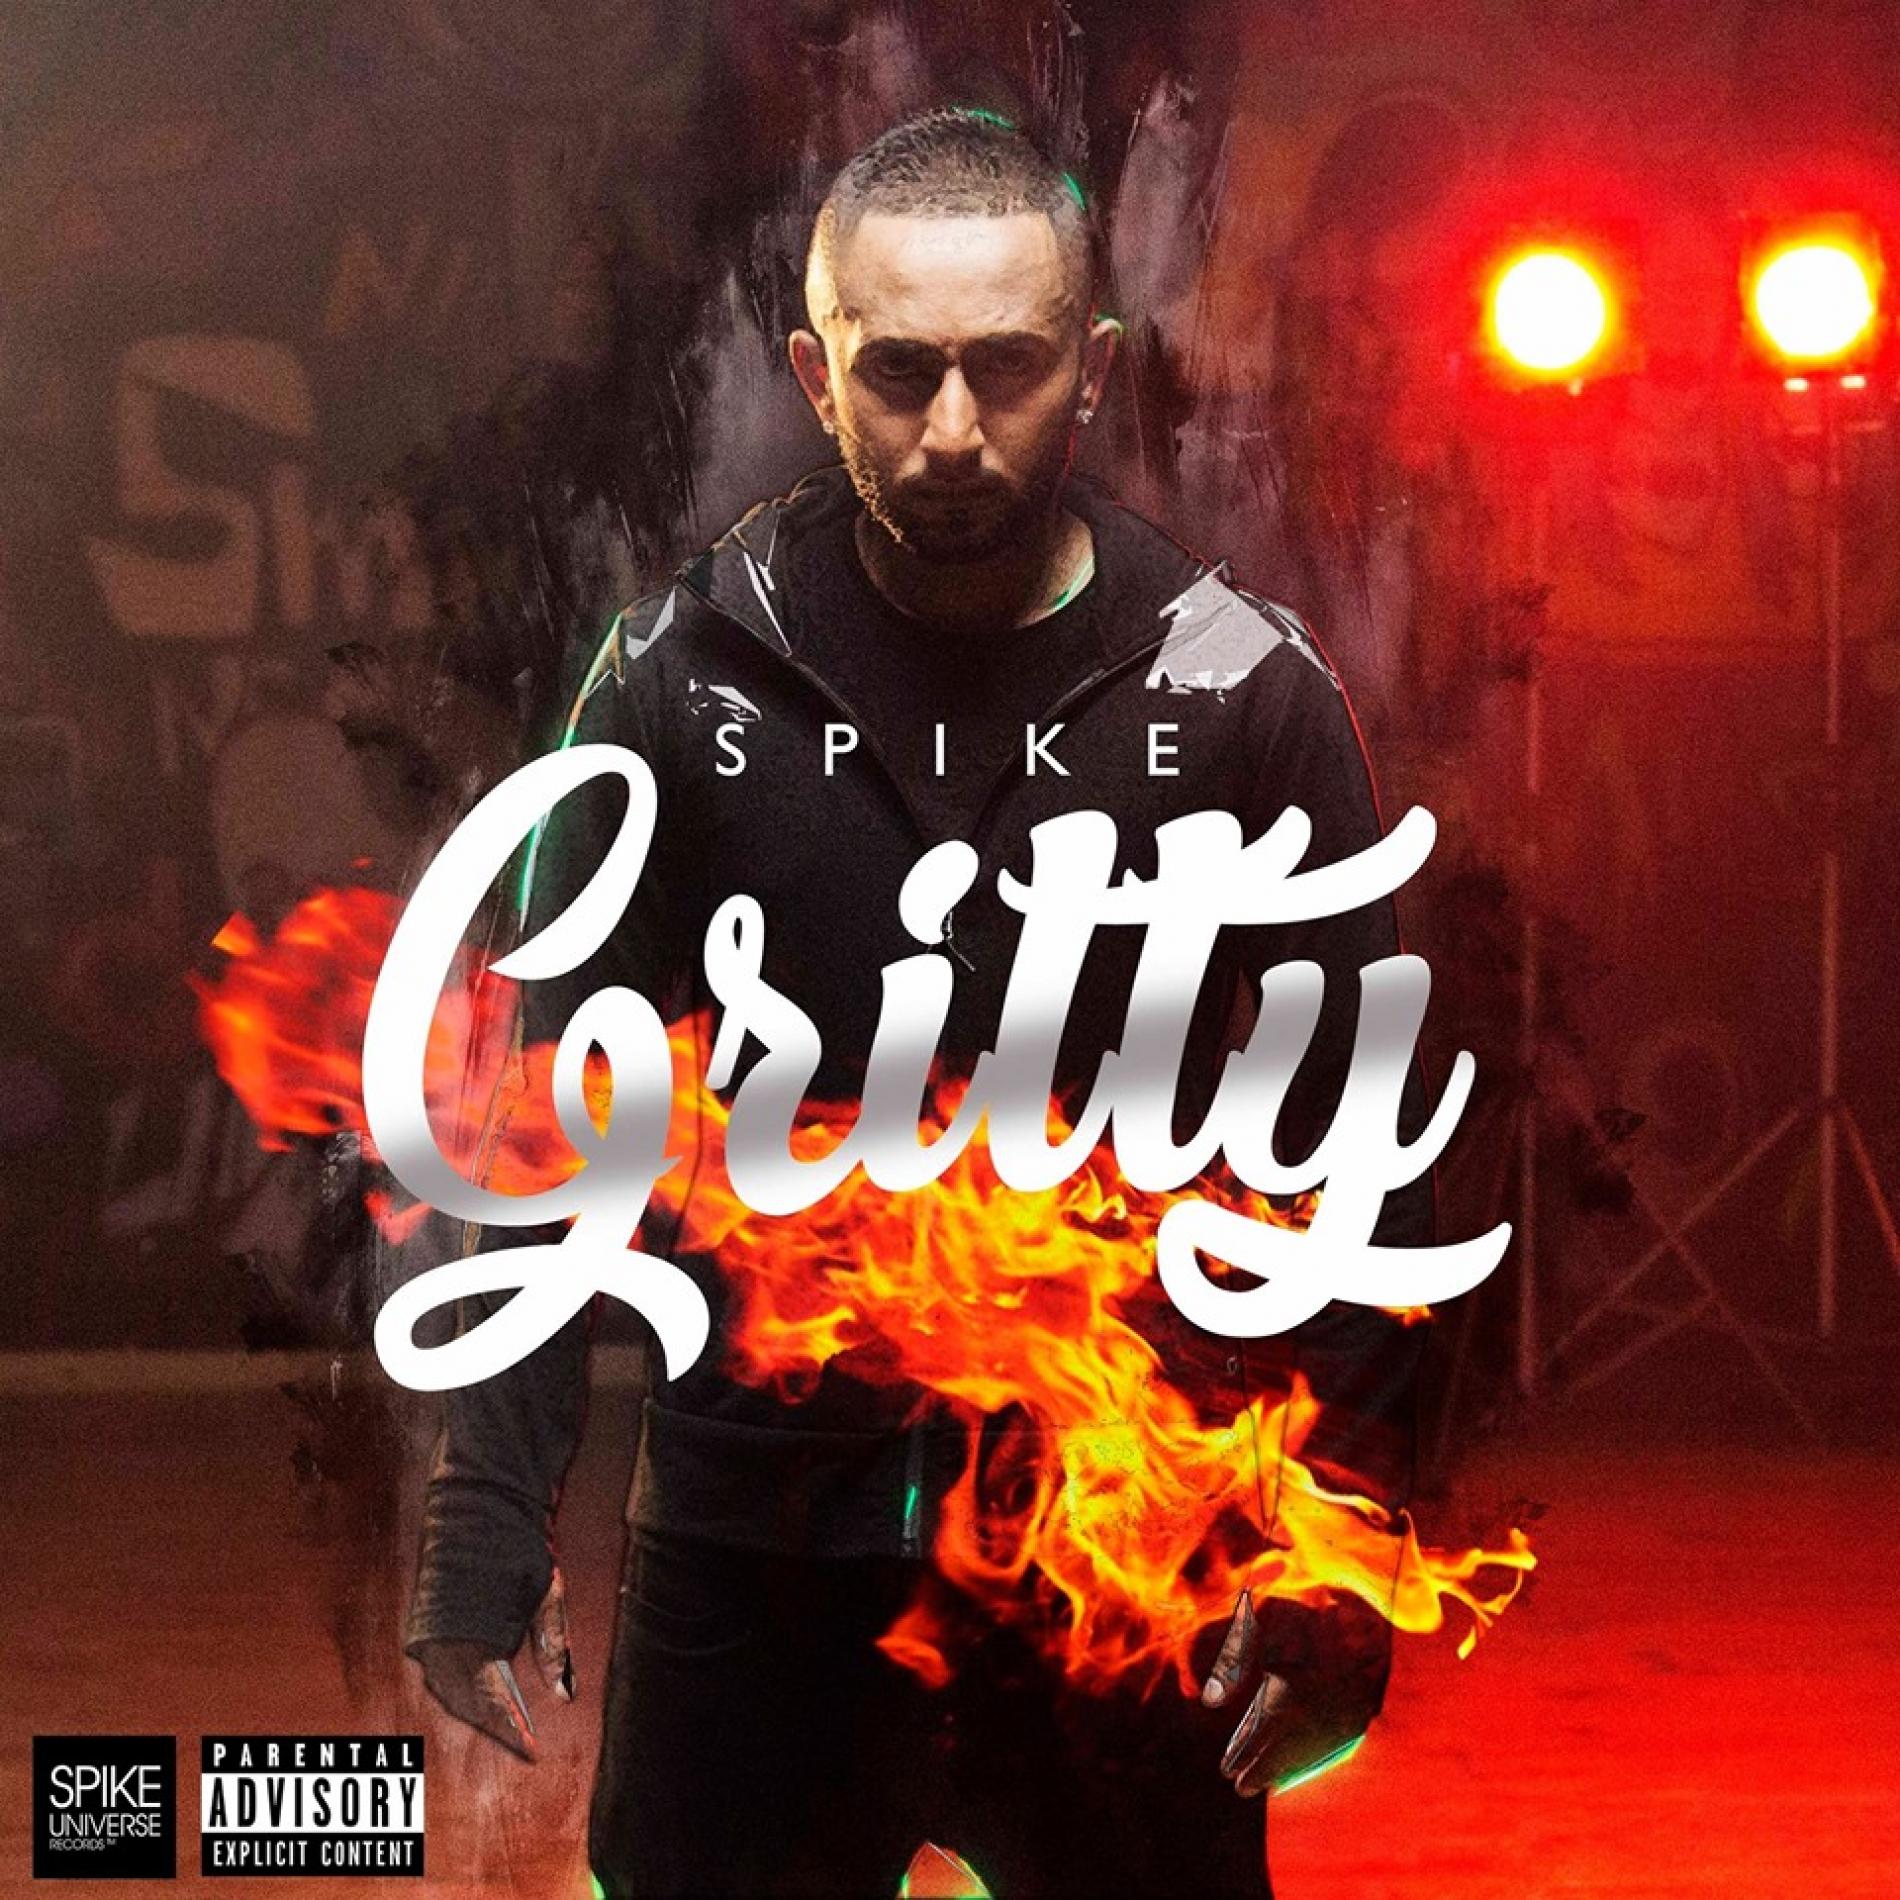 The First Look At Rapper Spike’s ‘Gritty’ Is Here